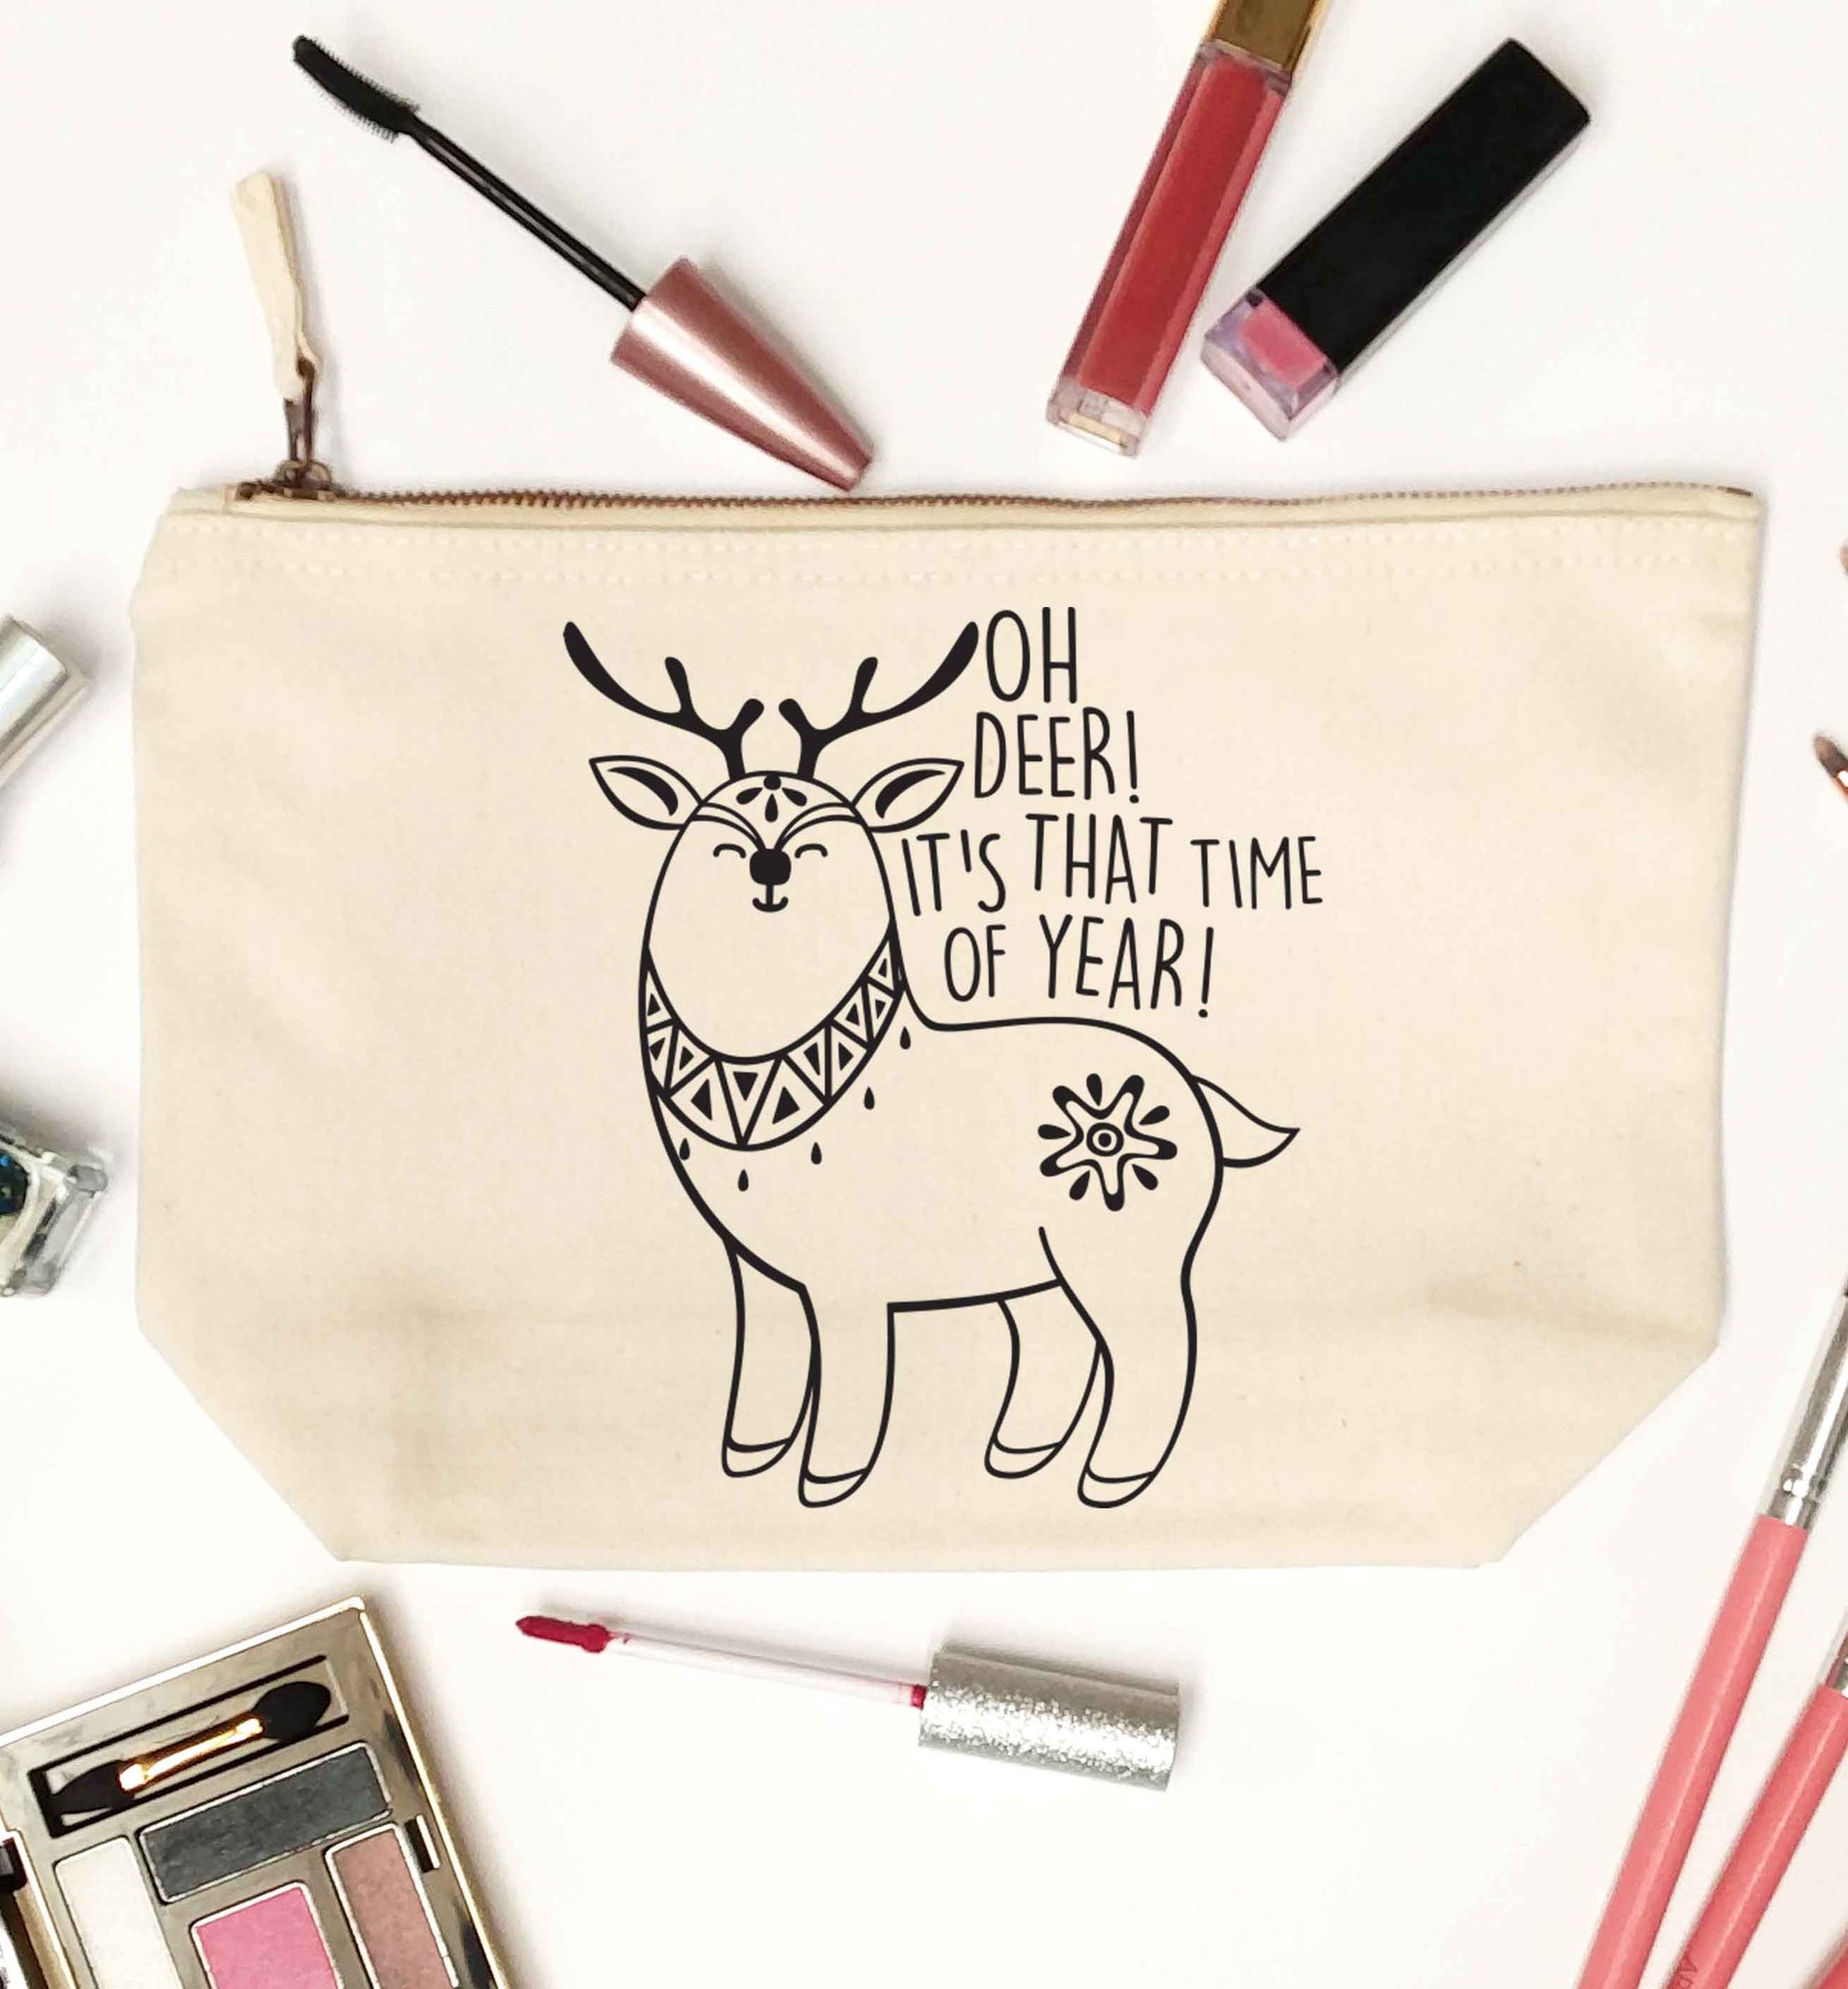 Oh dear it's that time of year natural makeup bag